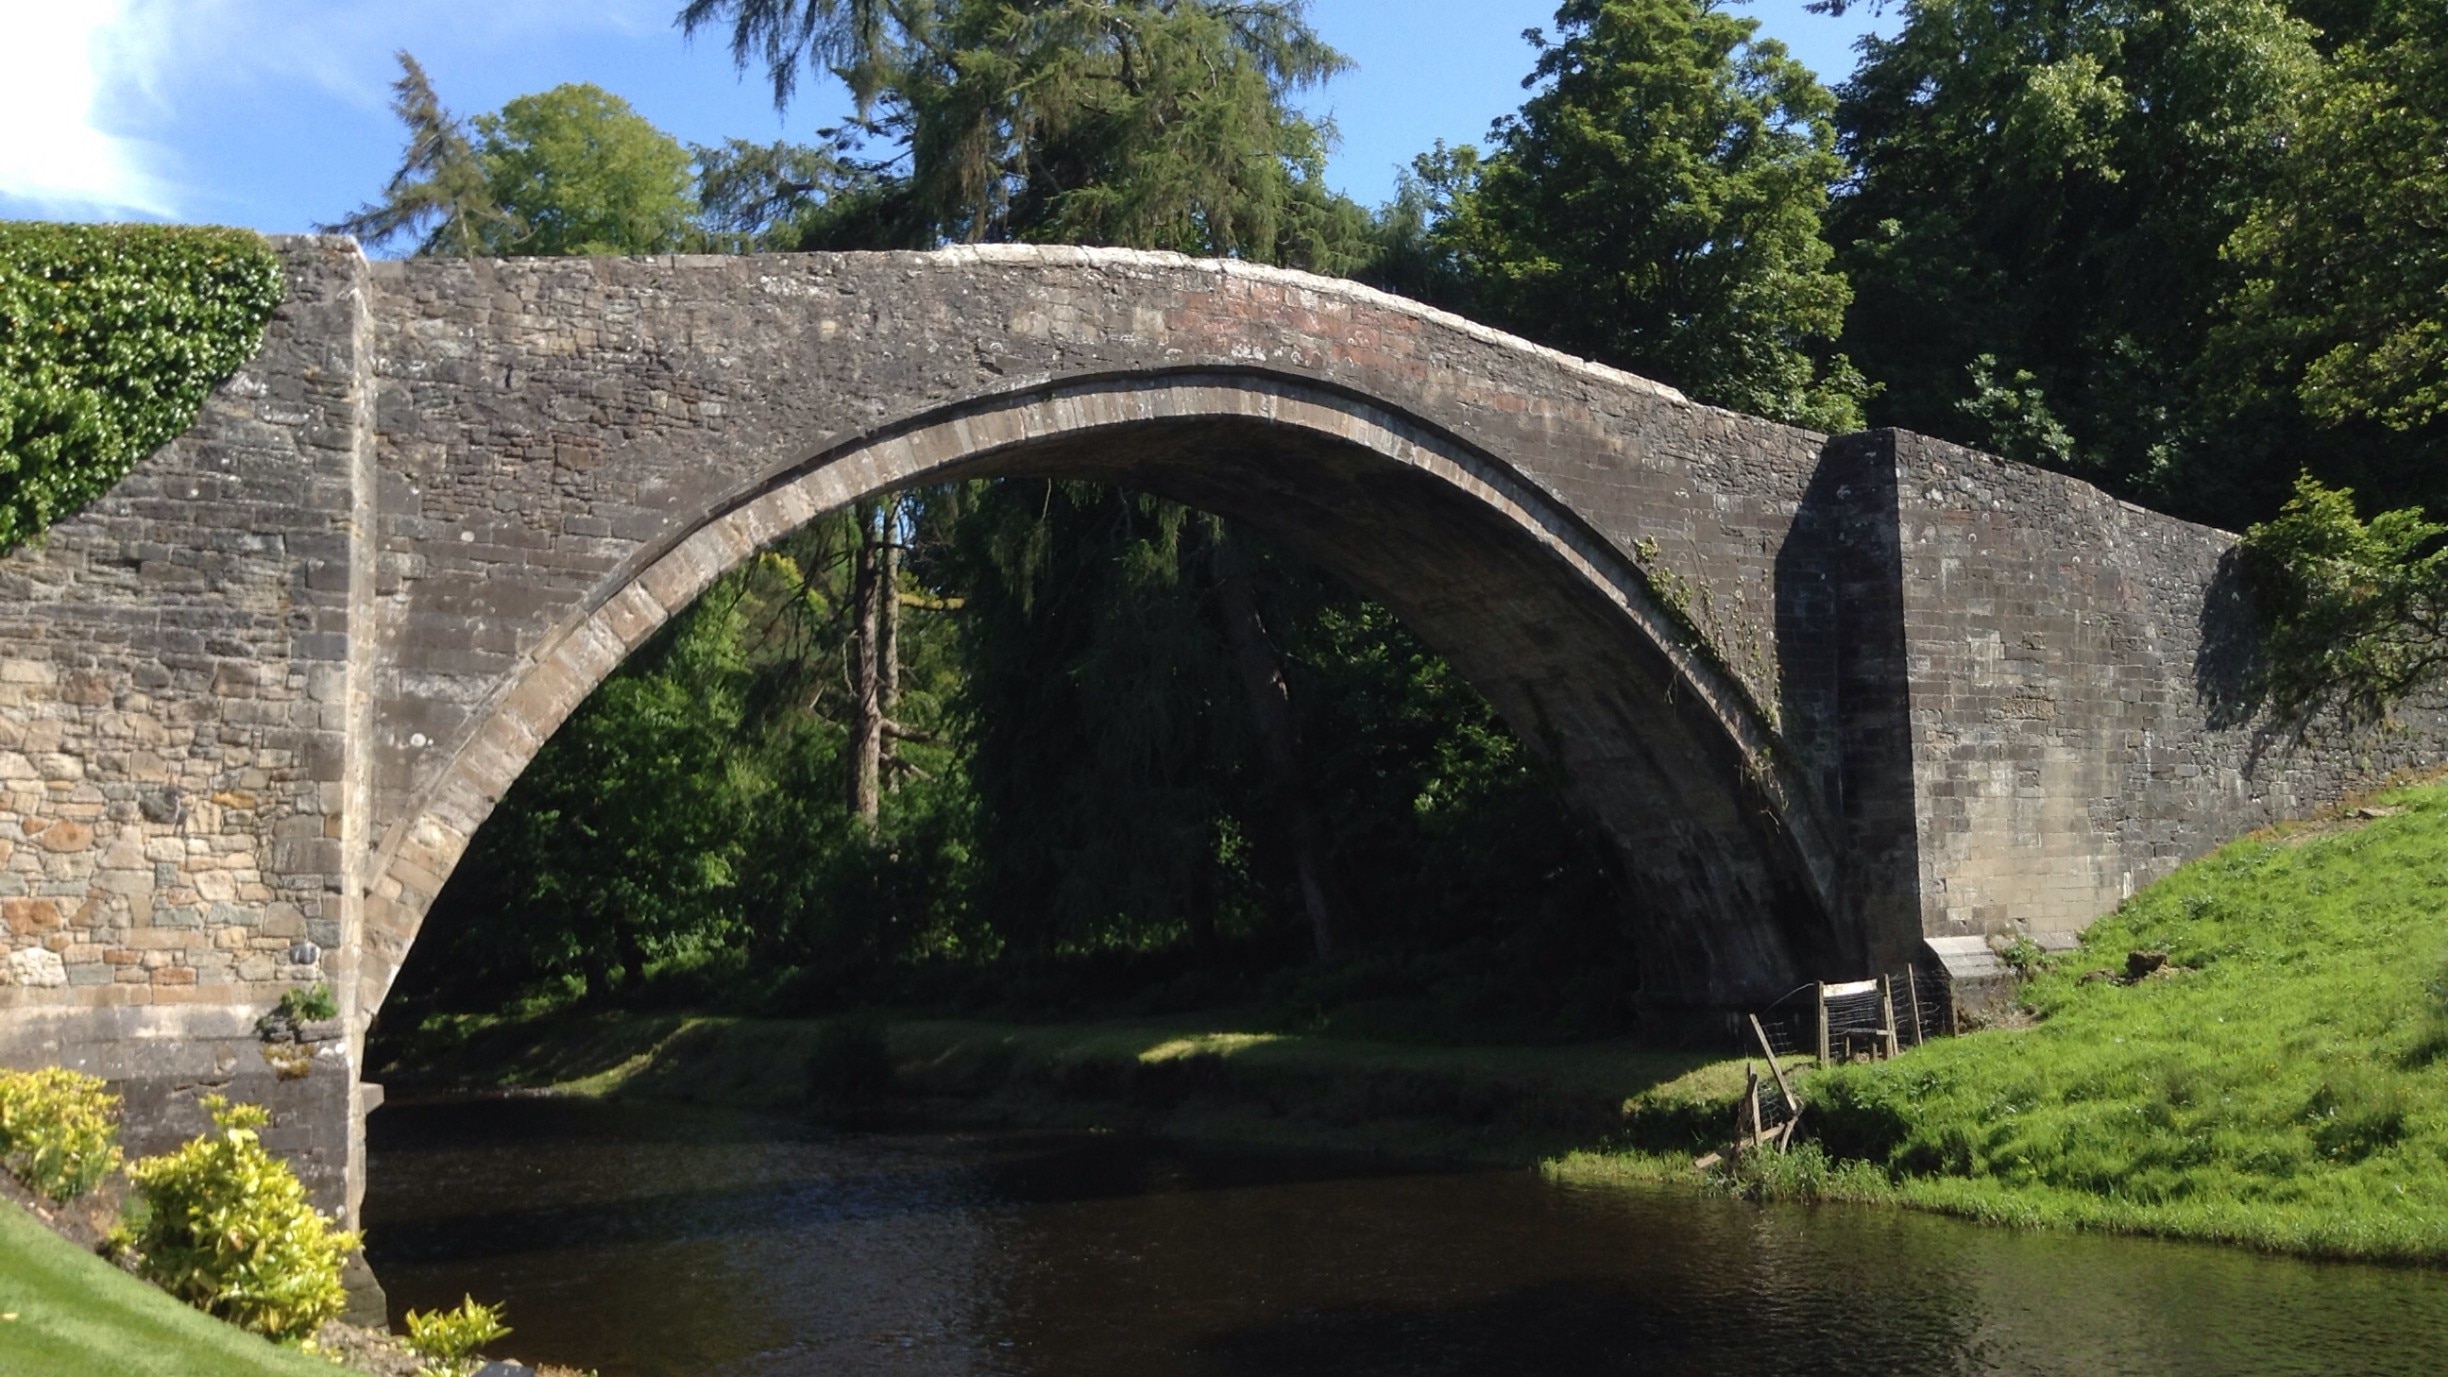 The Brig o' Doon is a late medieval bridge over the River Doon at Alloway.

Made famous by Robert Burns' poem, Tam o' Shanter.